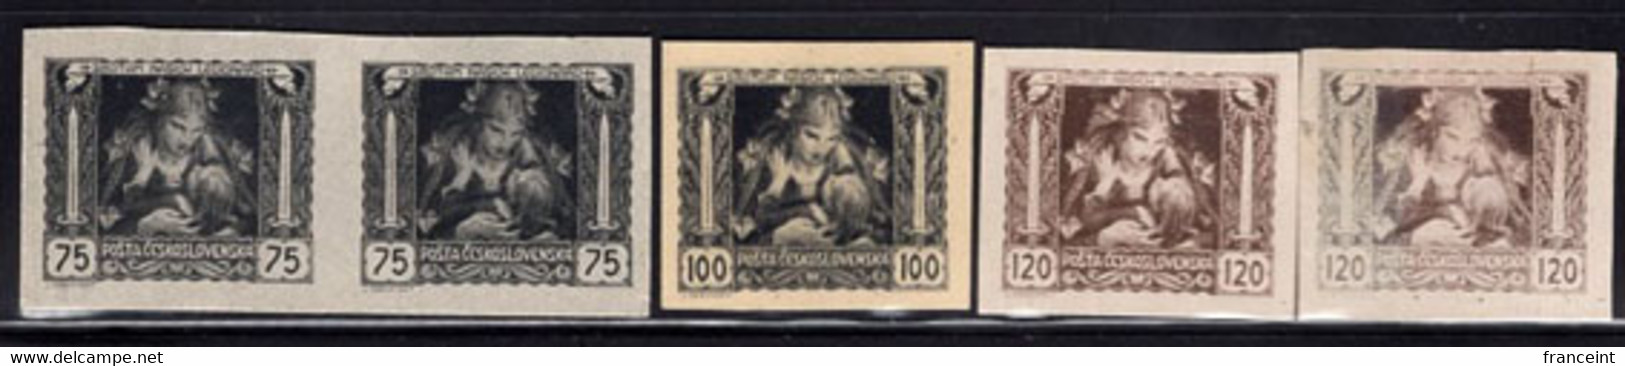 CZECHOSLOVAKIA(1919) Mother And Child. Set Of 5 Imperforate Proofs Printed On Card Stock. Scott Nos B127-9. - Essais & Réimpressions